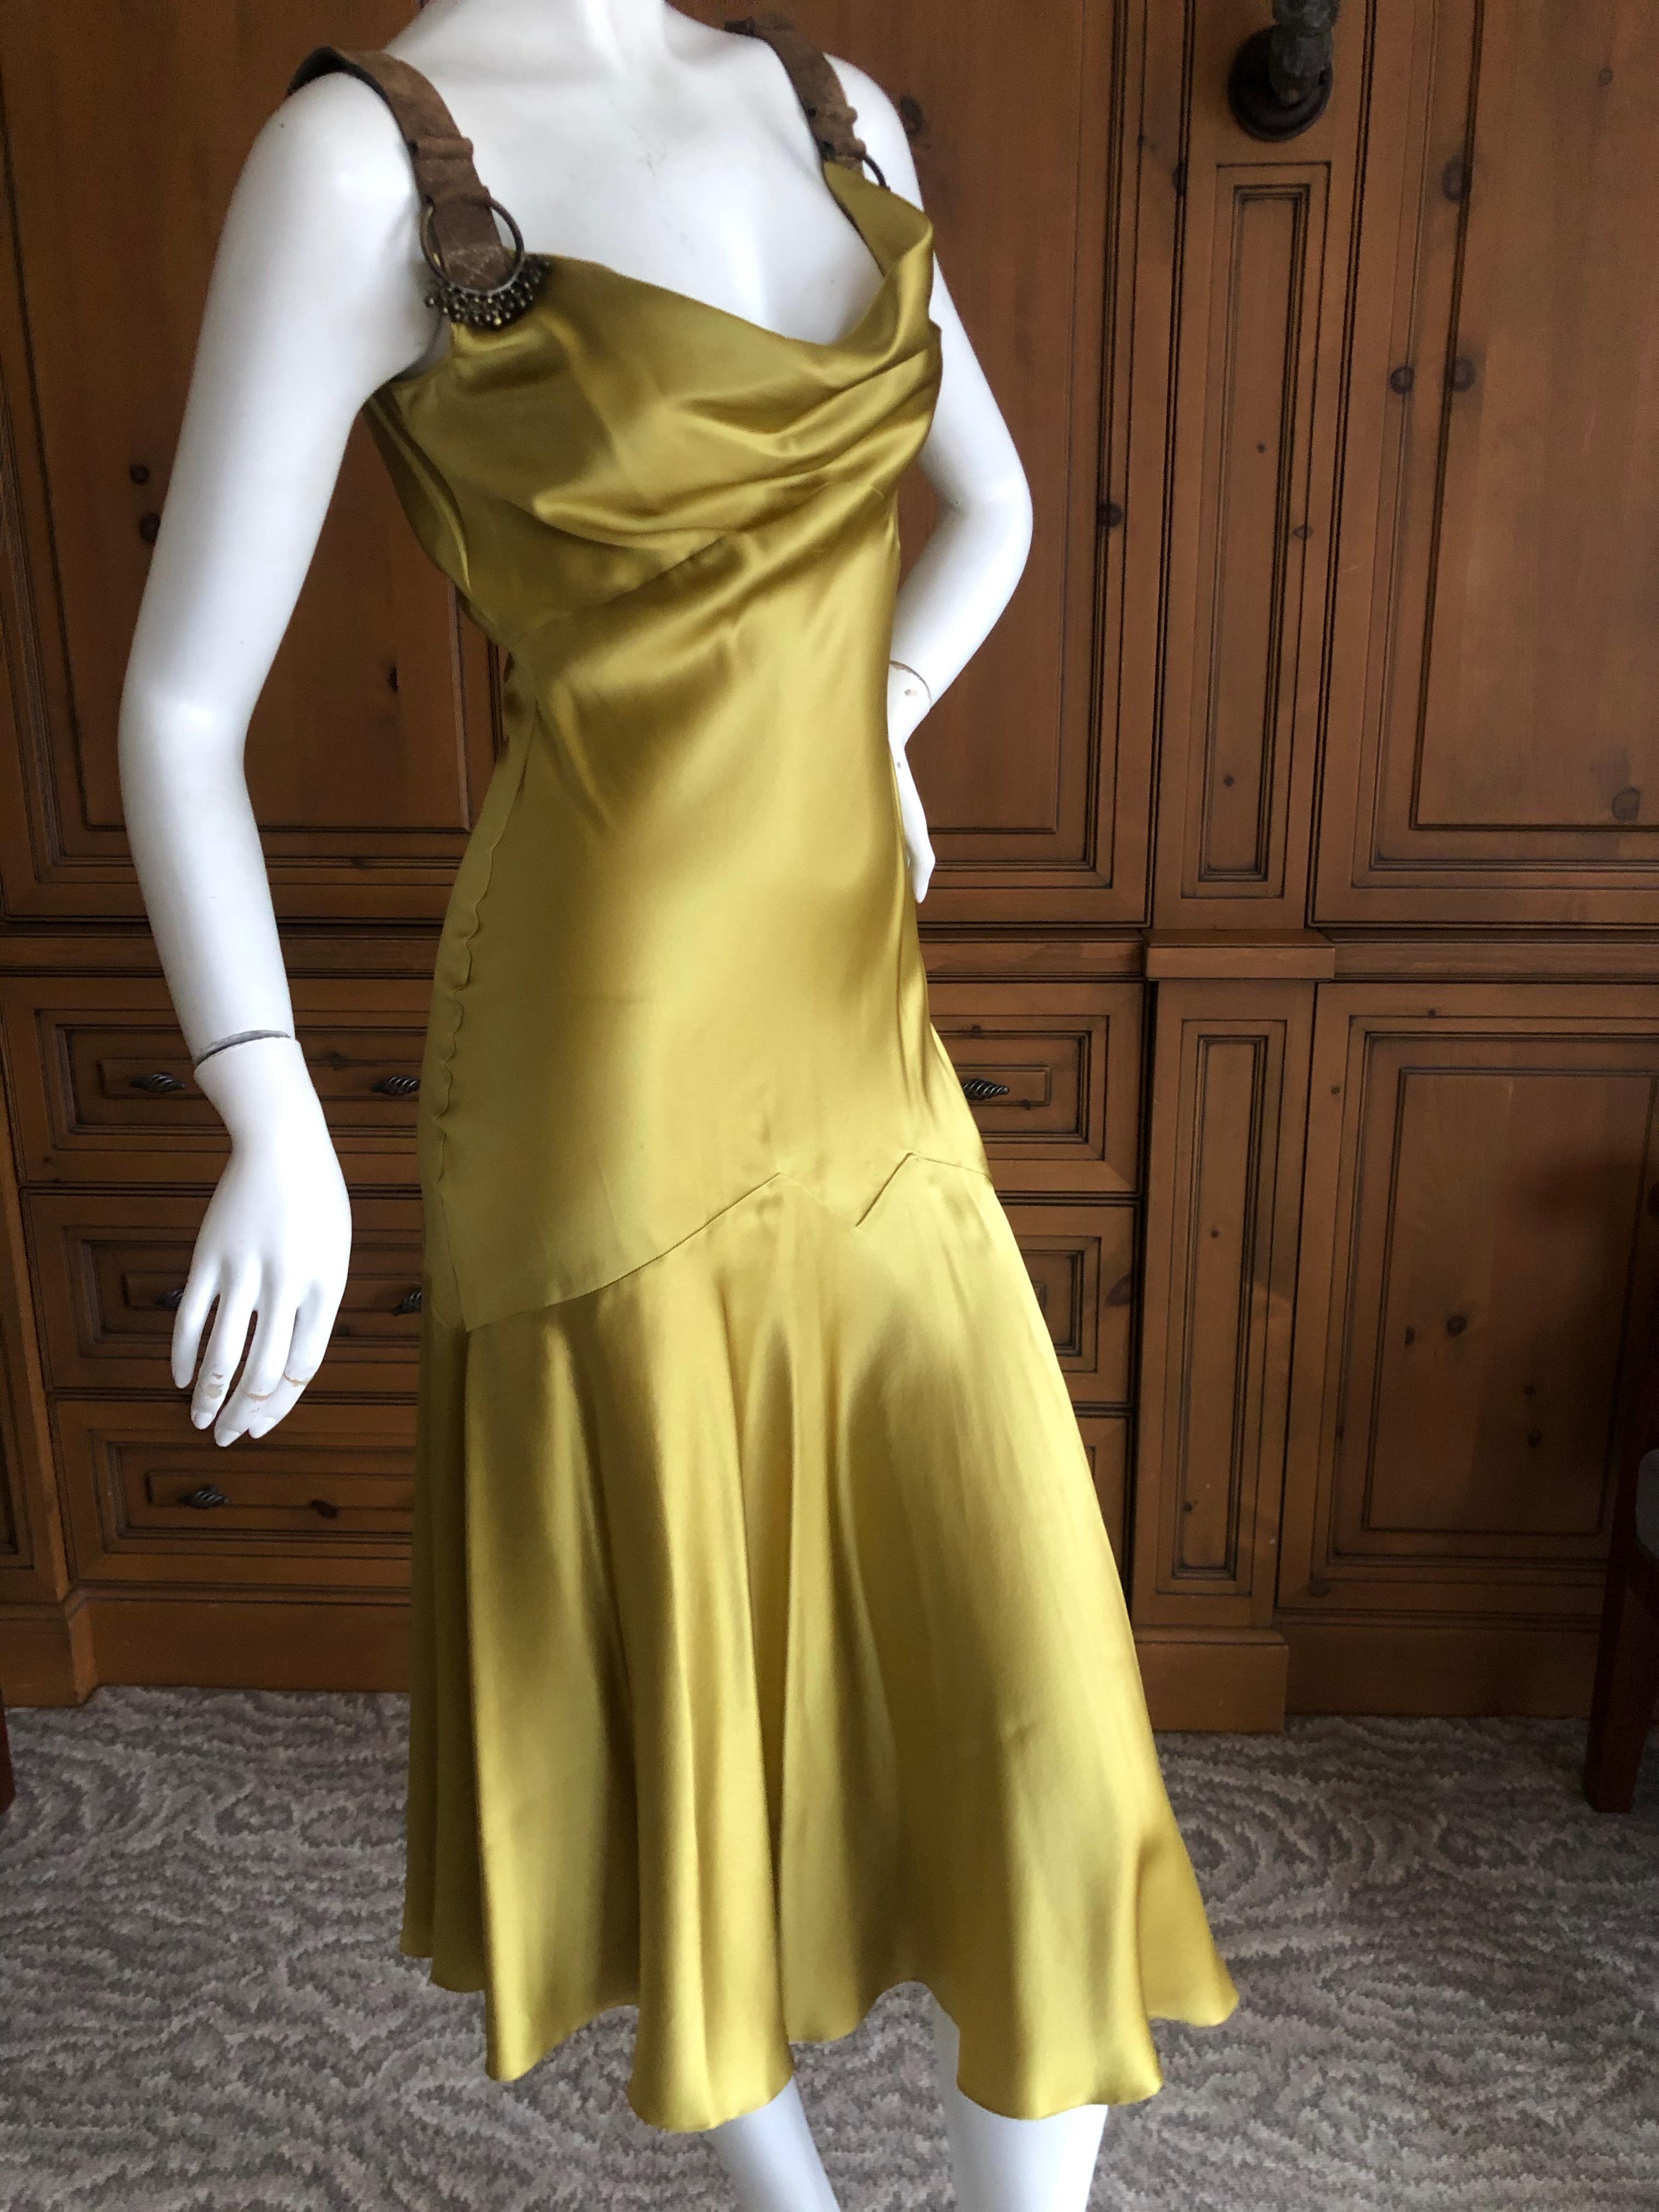 Beige John Galliano Chartreuse Silk Charmeuse Cocktail Dress with Leather Straps For Sale